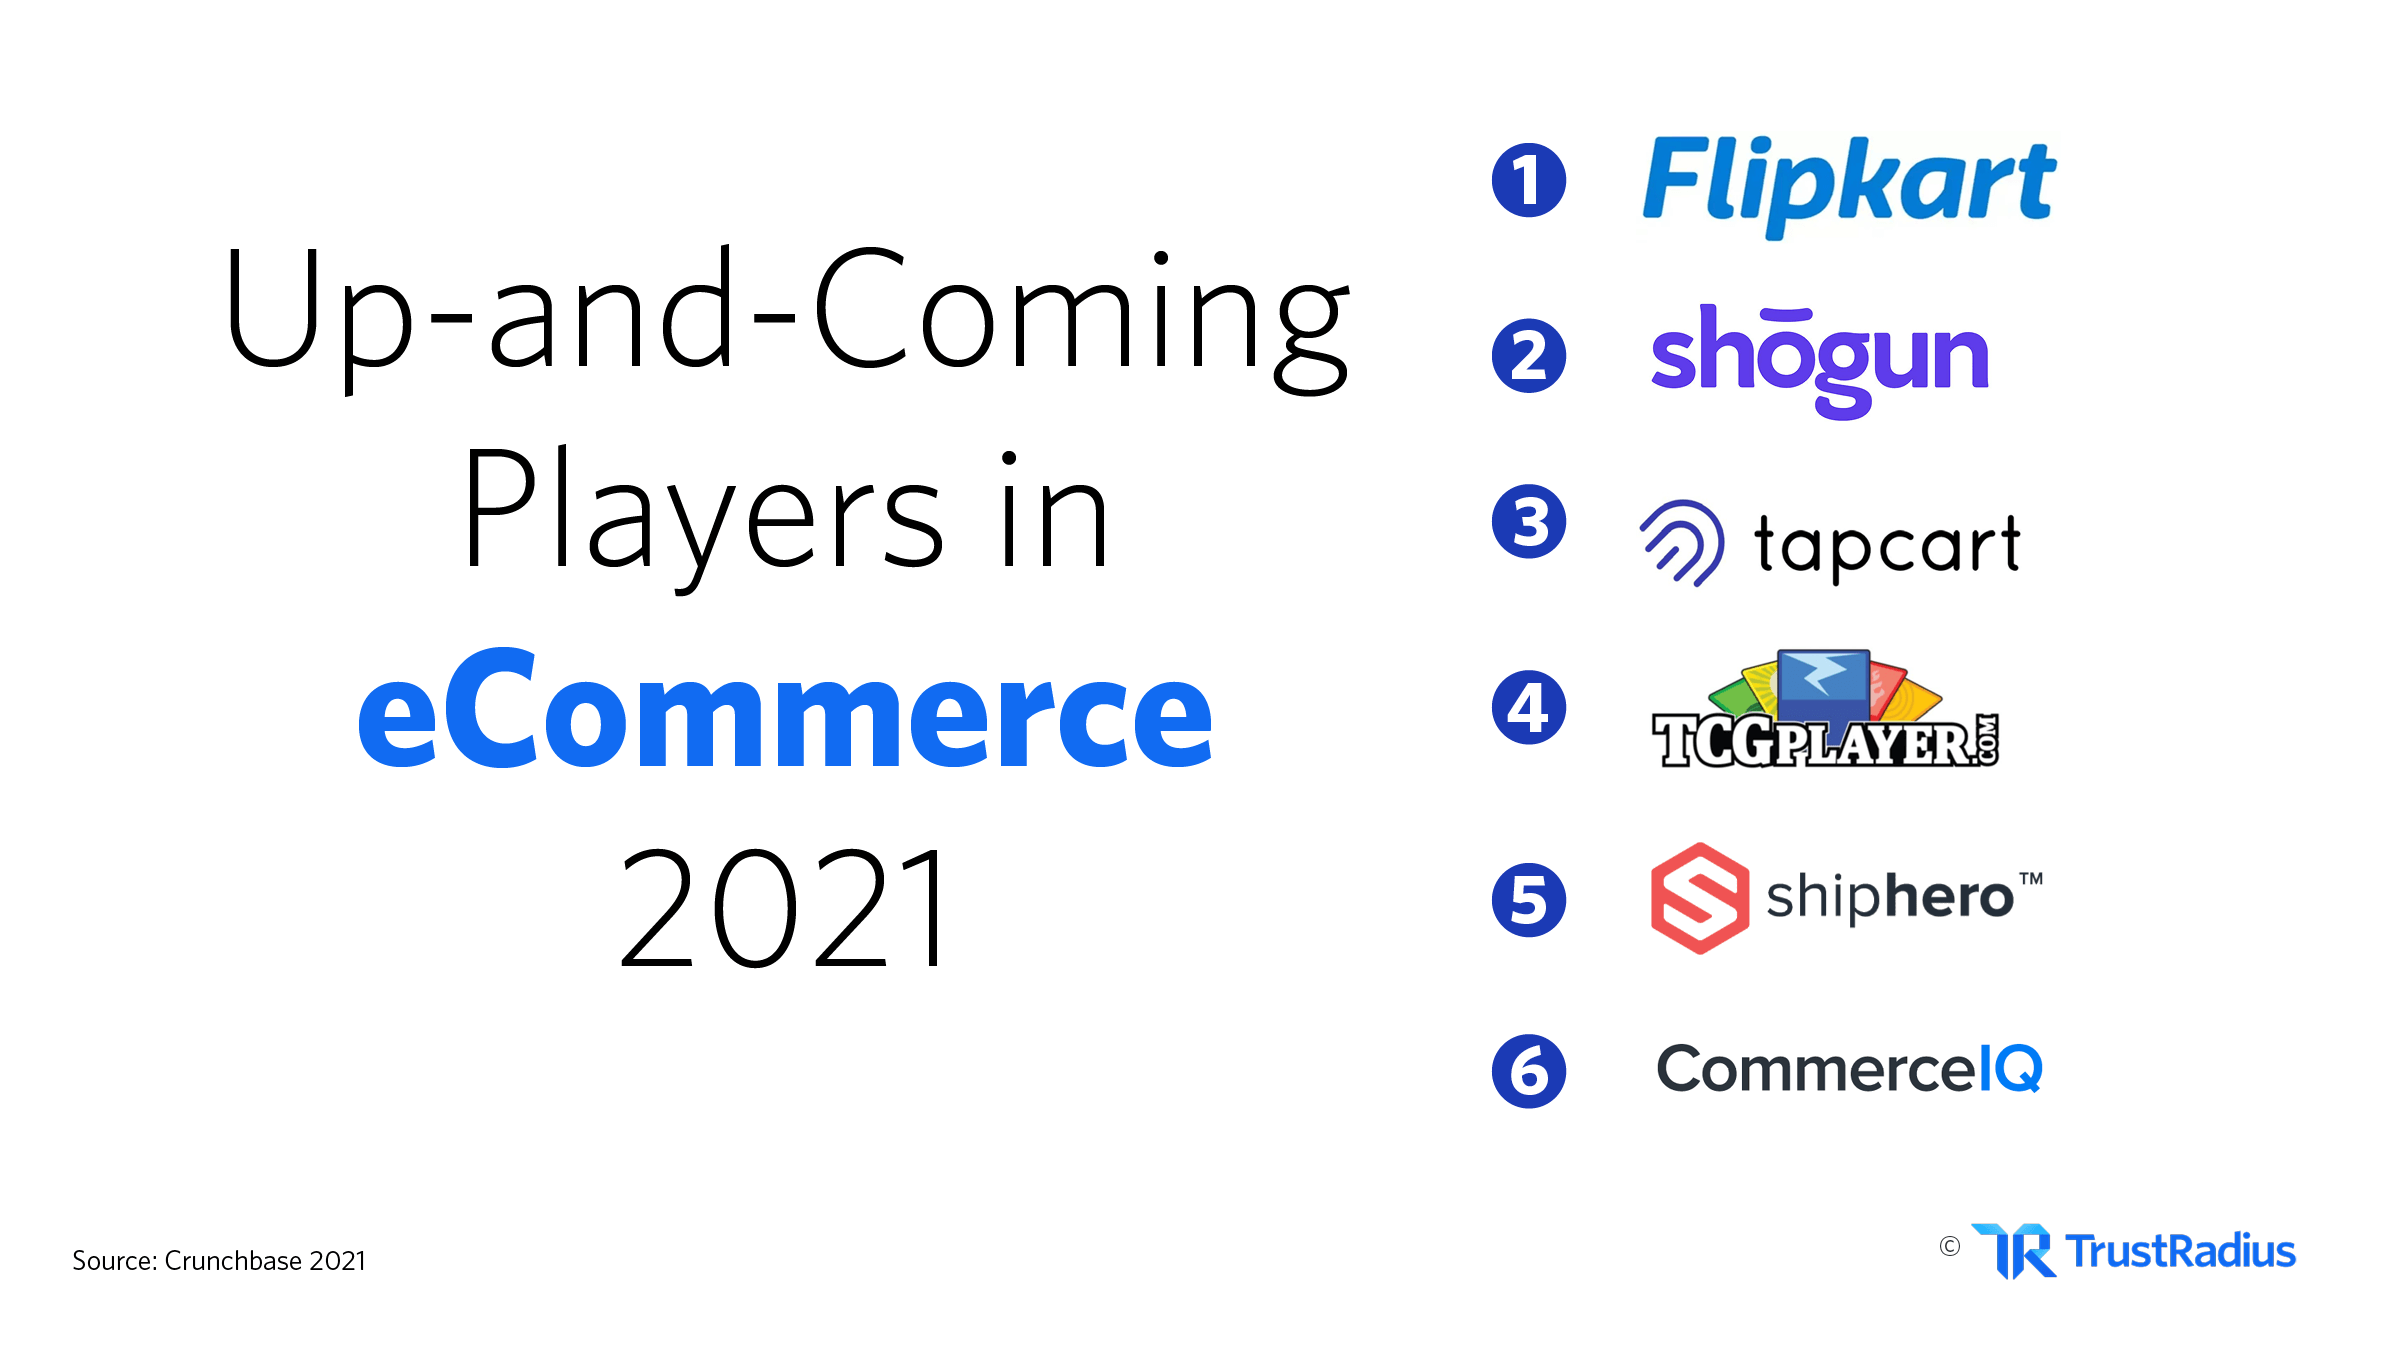 Up-and-comers in the ecommerce market in 2021